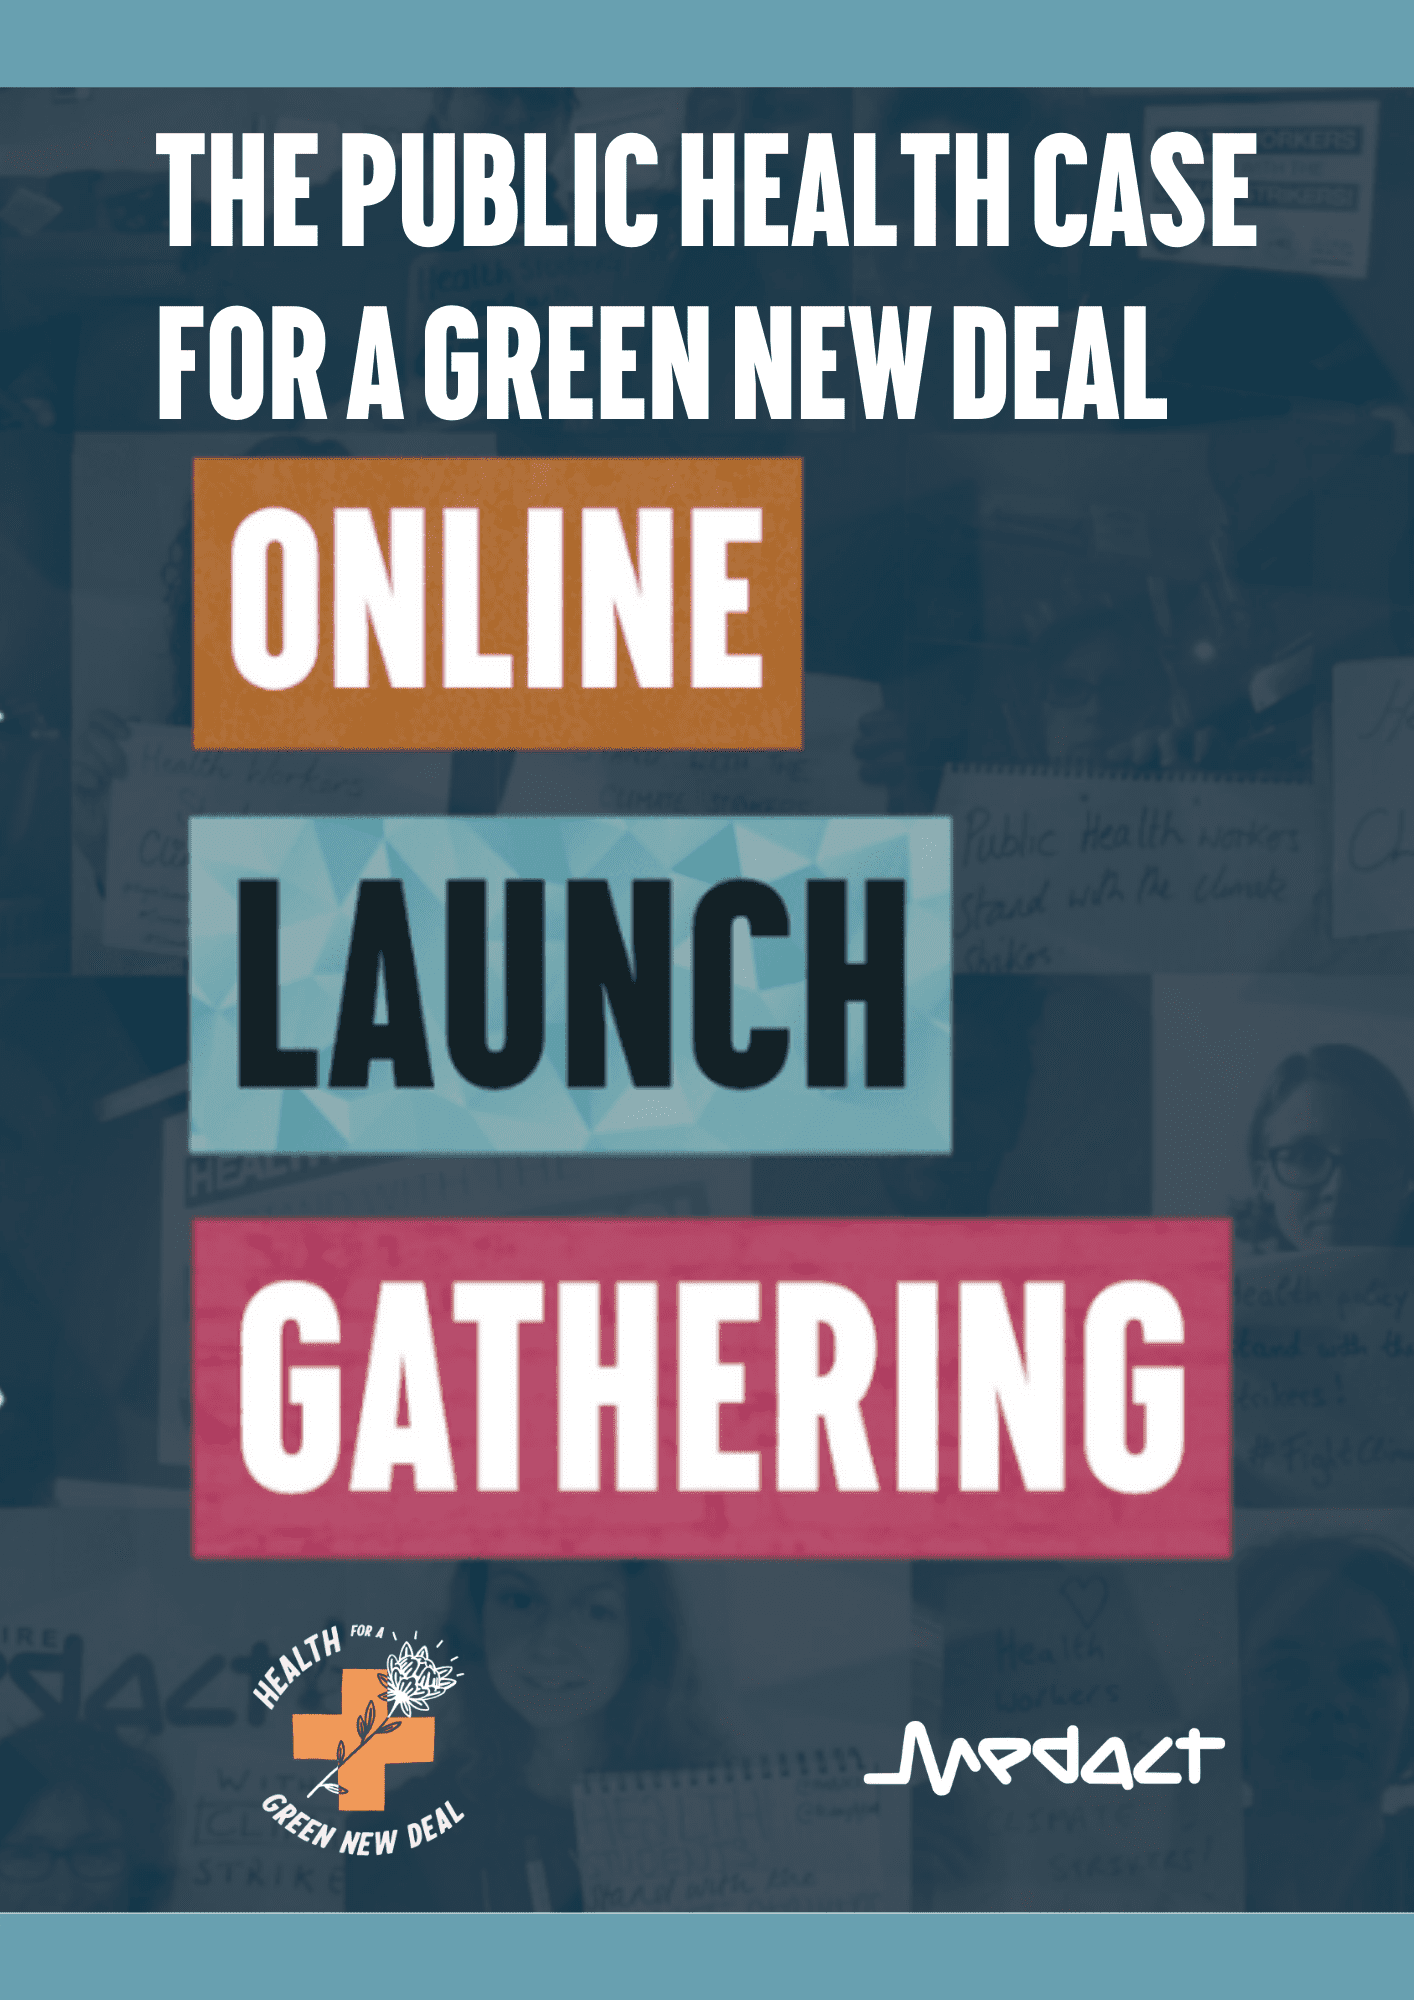 Videos from our Health for a Green New Deal Launch Gathering Weekend